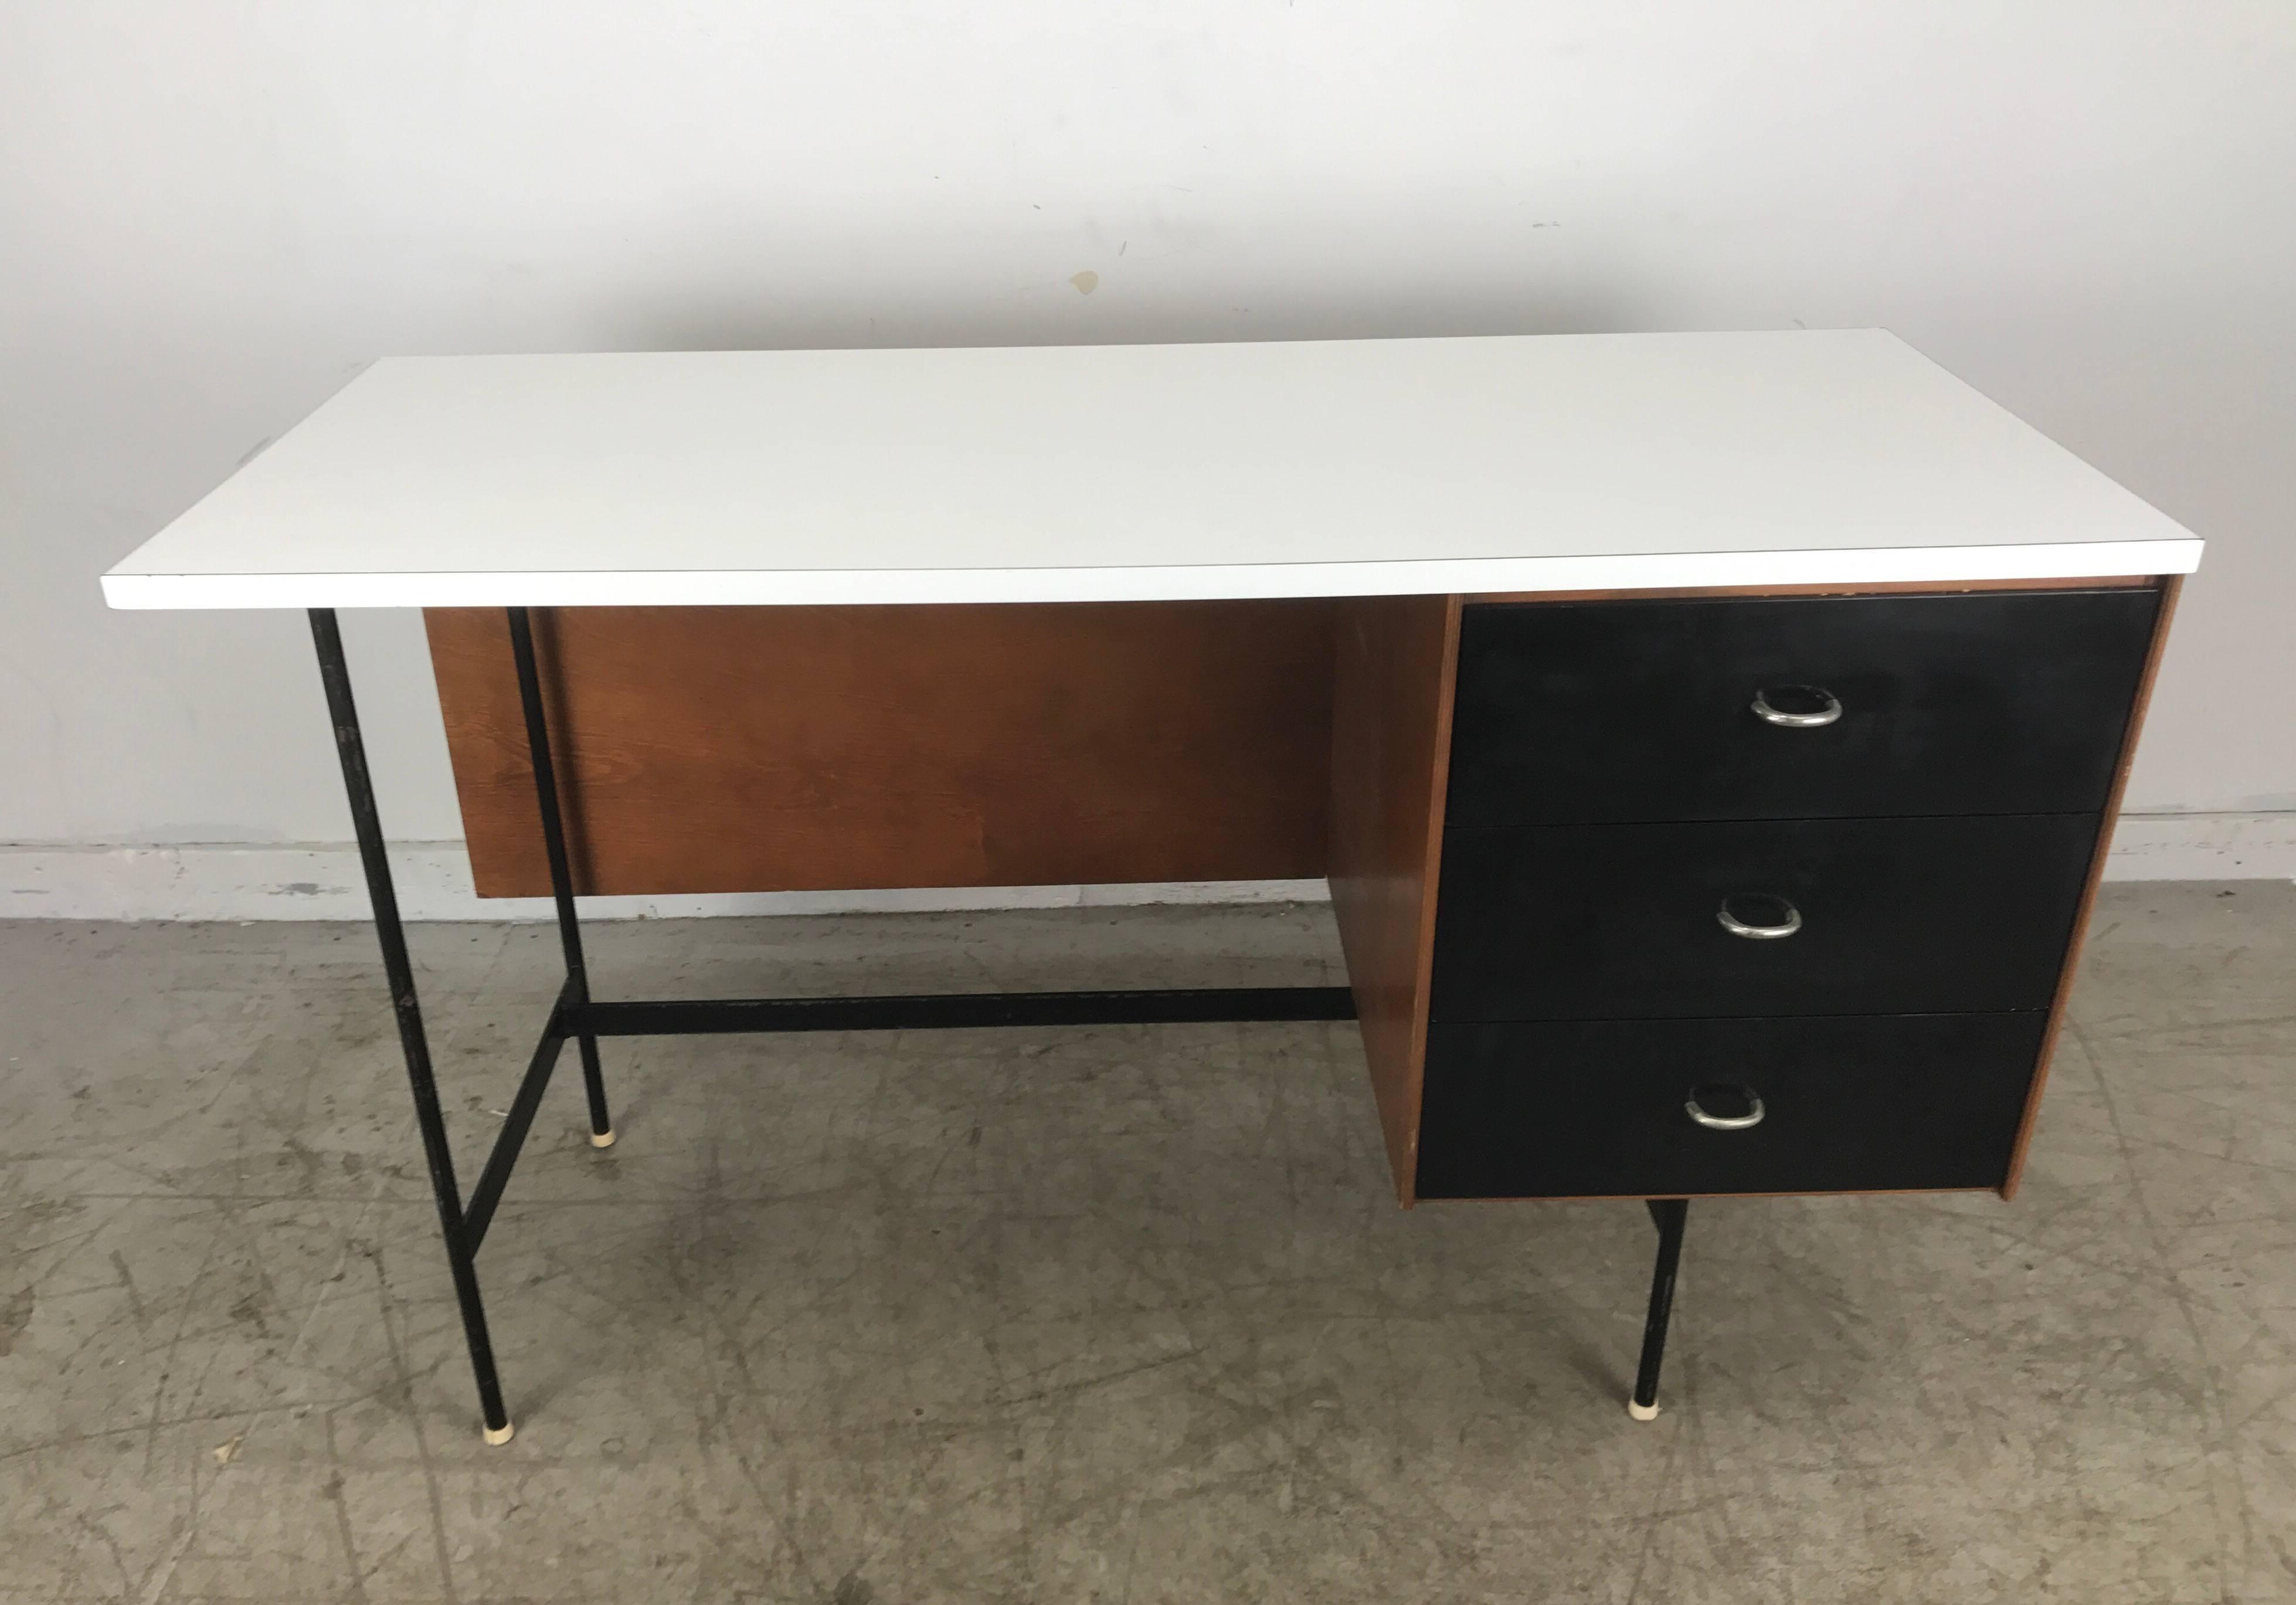 Classic Mid-Century Modern Desk by Thonet manner of Finn Juhl, striking design, architectural iron frame, birch ply body with black laminate drawer fronts, molded plastic interiors, aluminum pulls and white laminate top. Hand delivery avail to New